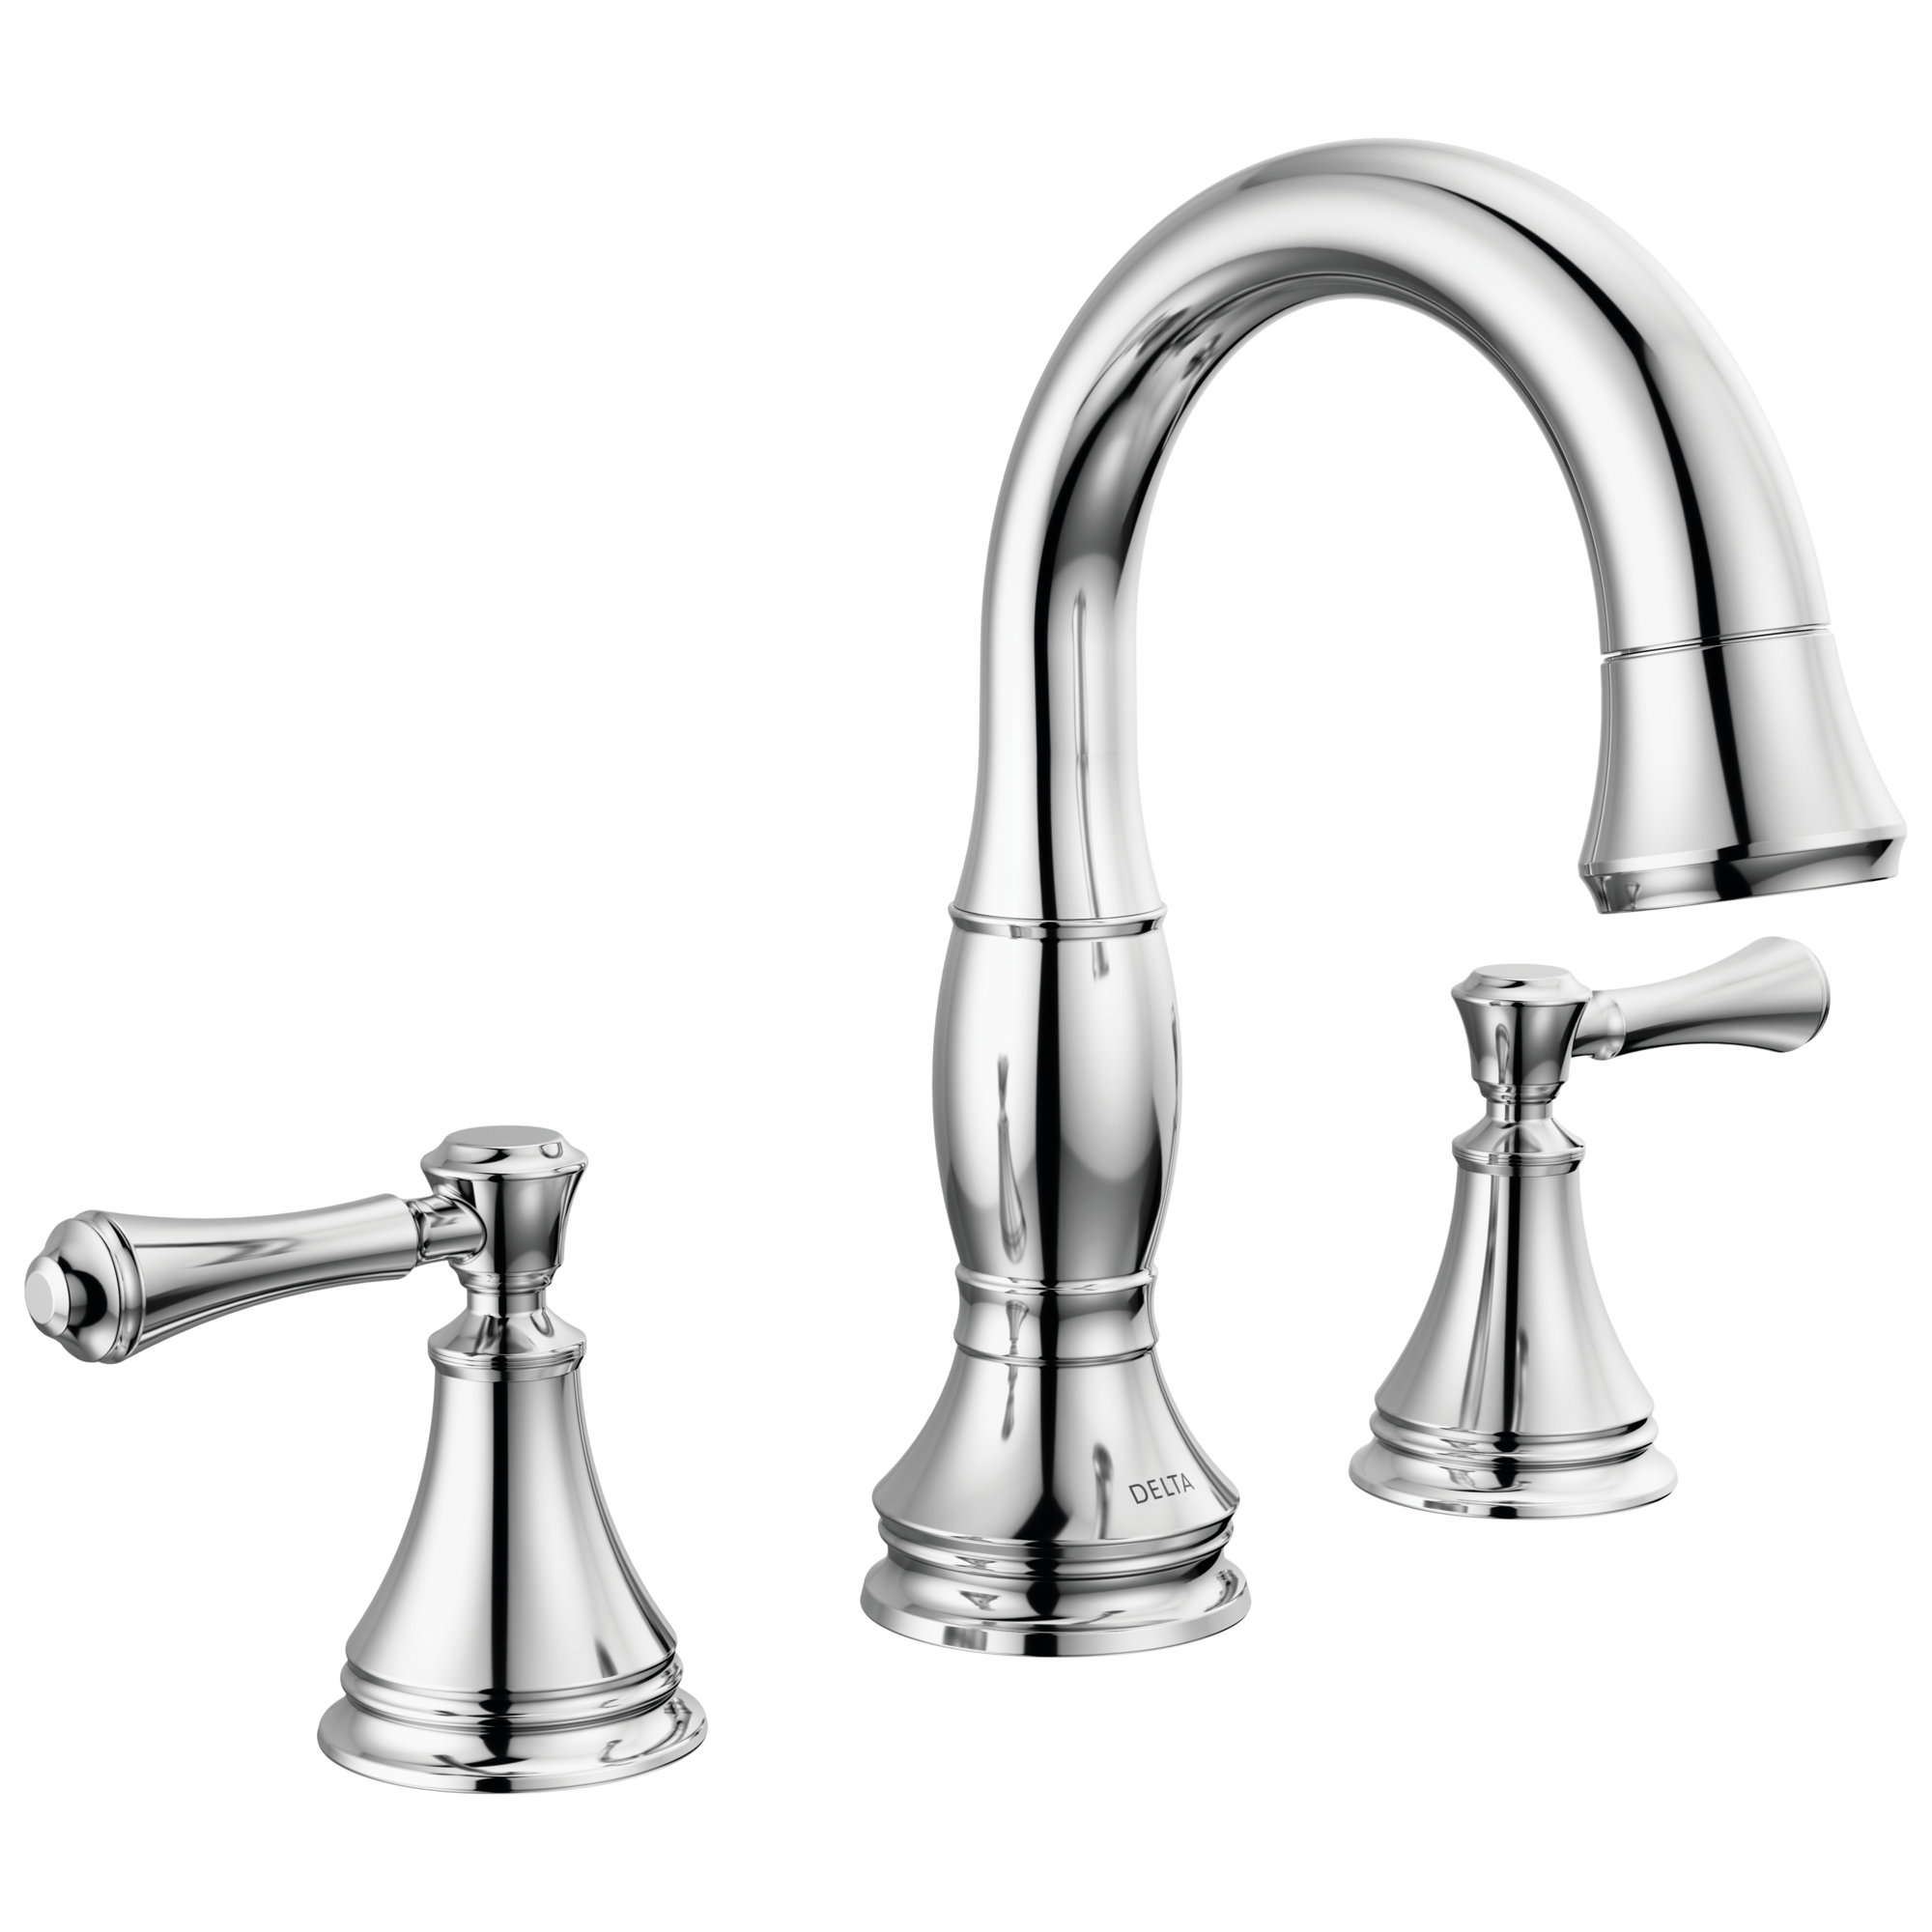 Delta Cassidy 3-Hole Widespread Pull Out Sprayer Bathroom Faucet, 2-Handle  Bathroom Sink Faucet & Reviews